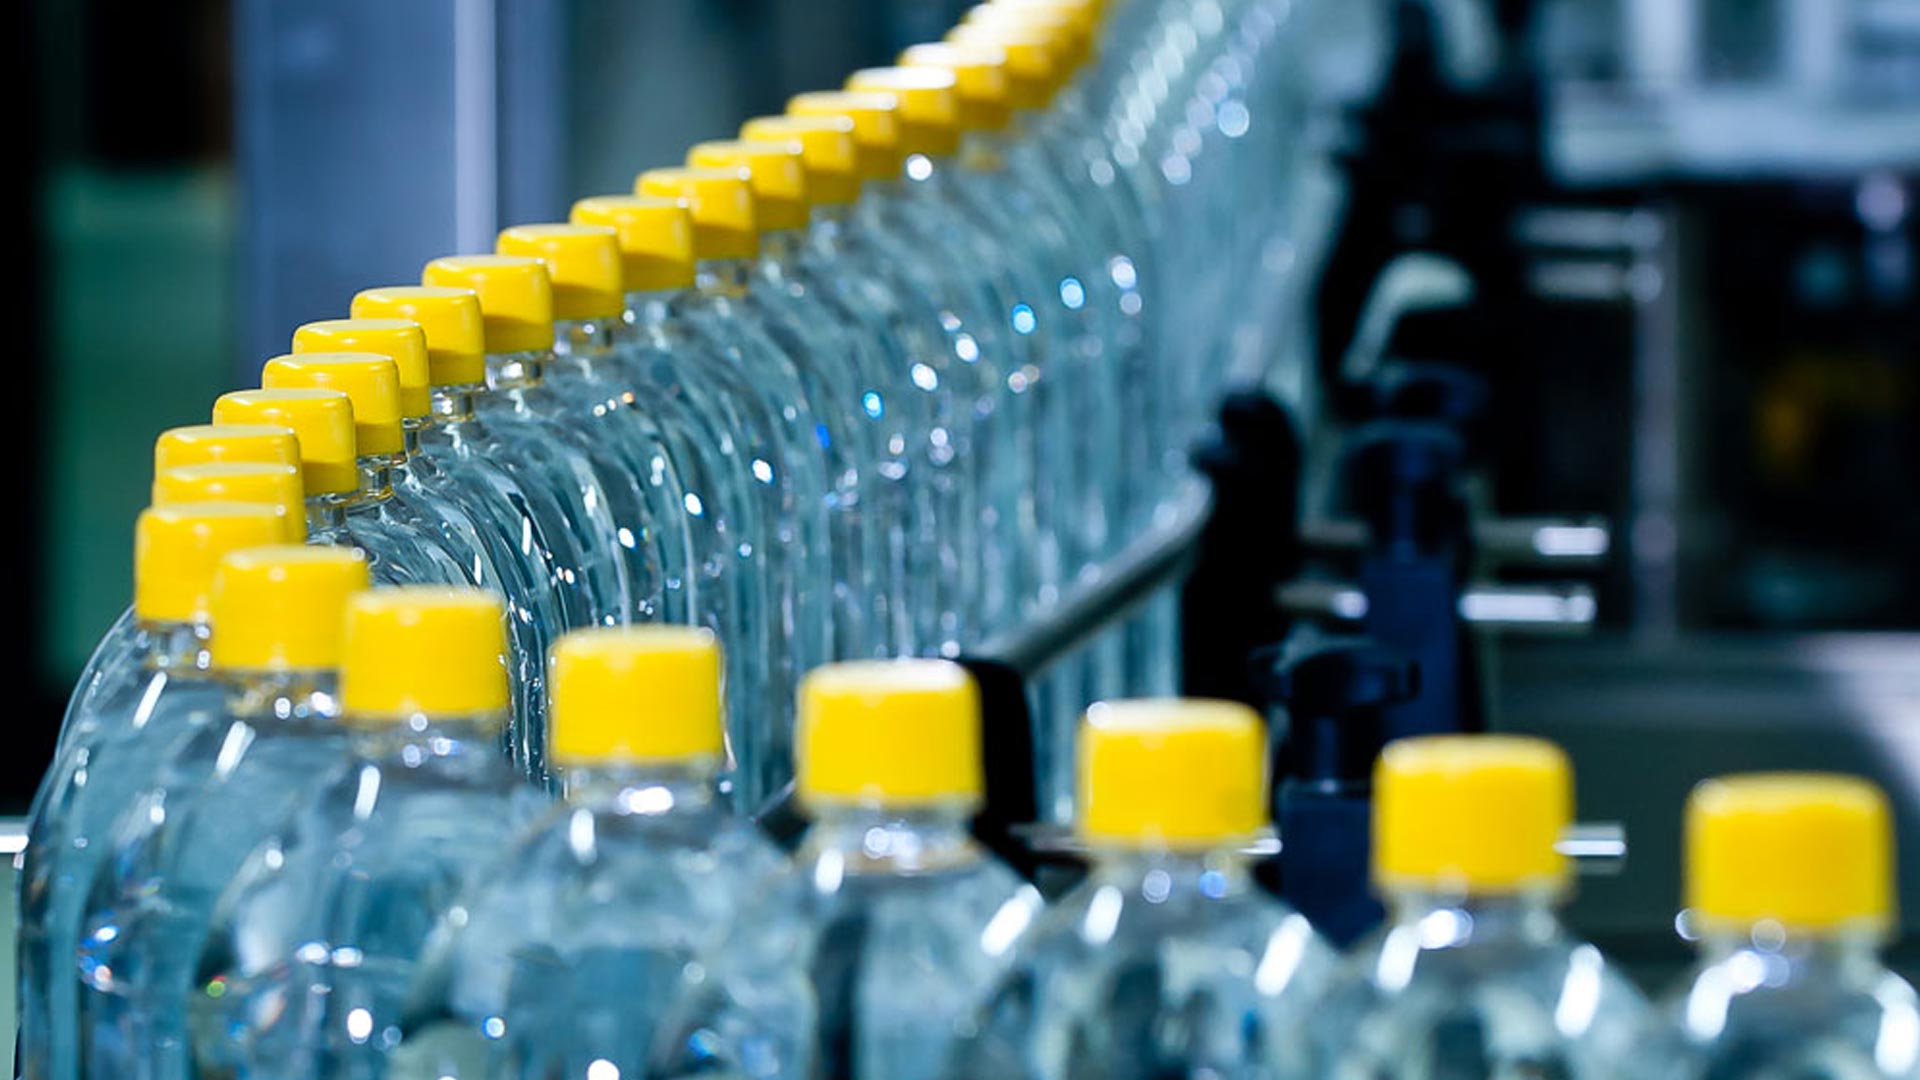 Study on the feasibility of the implementation of a deposit-refund scheme (DRS) for single-use beverage containers in Catalonia